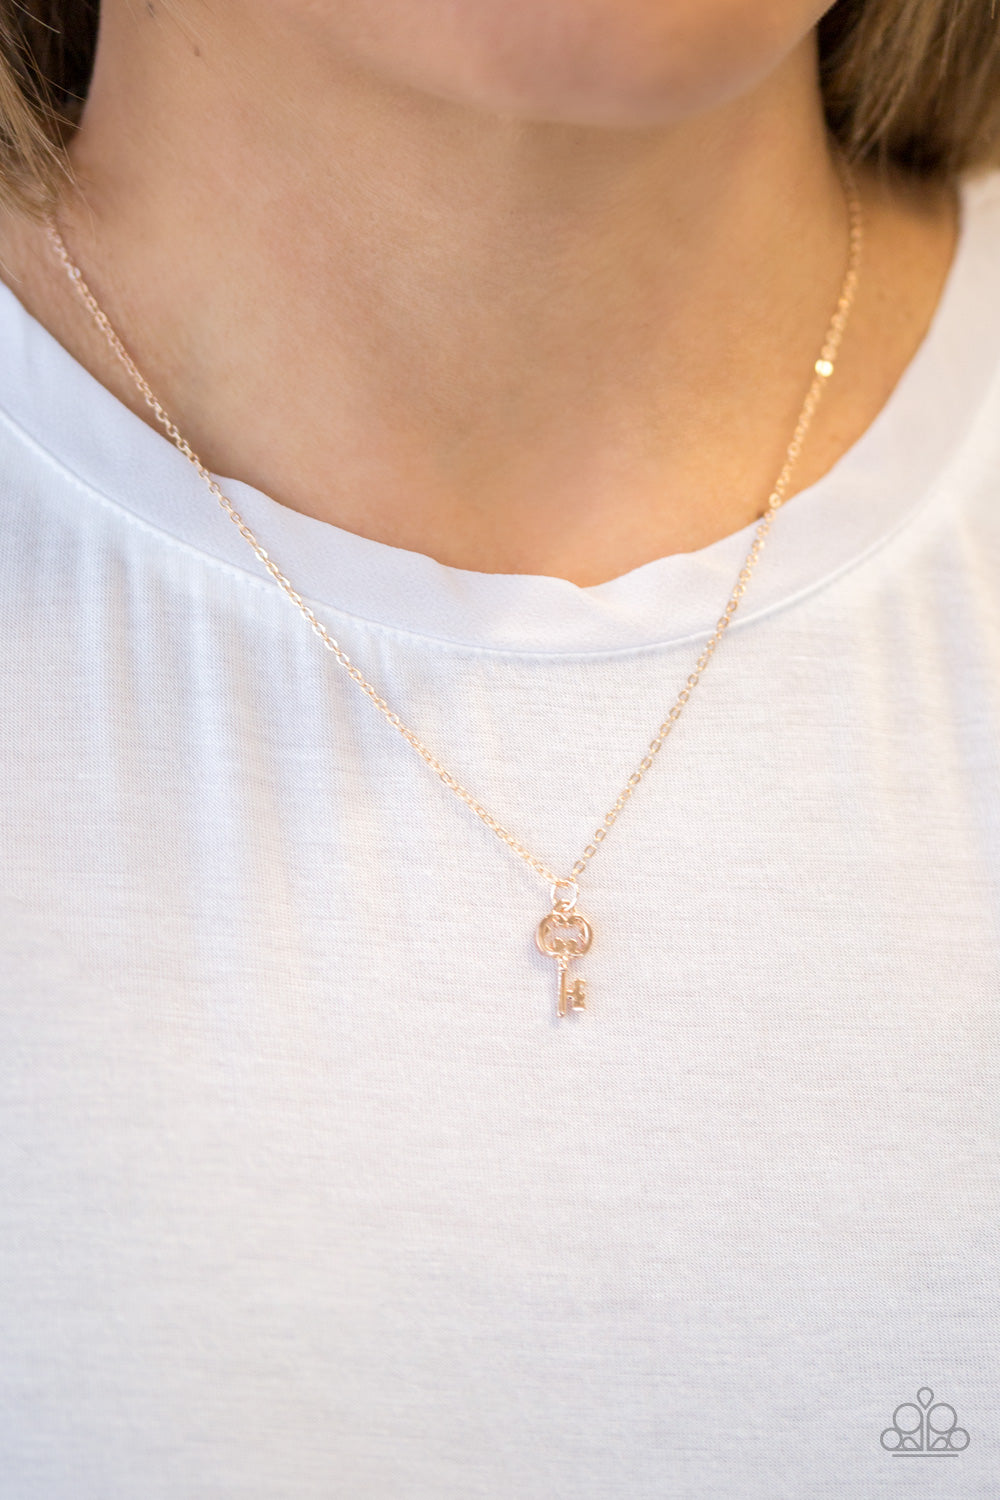 Paparazzi rose gold key swings from the bottom of a shiny rose gold chain, creating a whimsical pendant below the collar. Features an adjustable clasp closure.